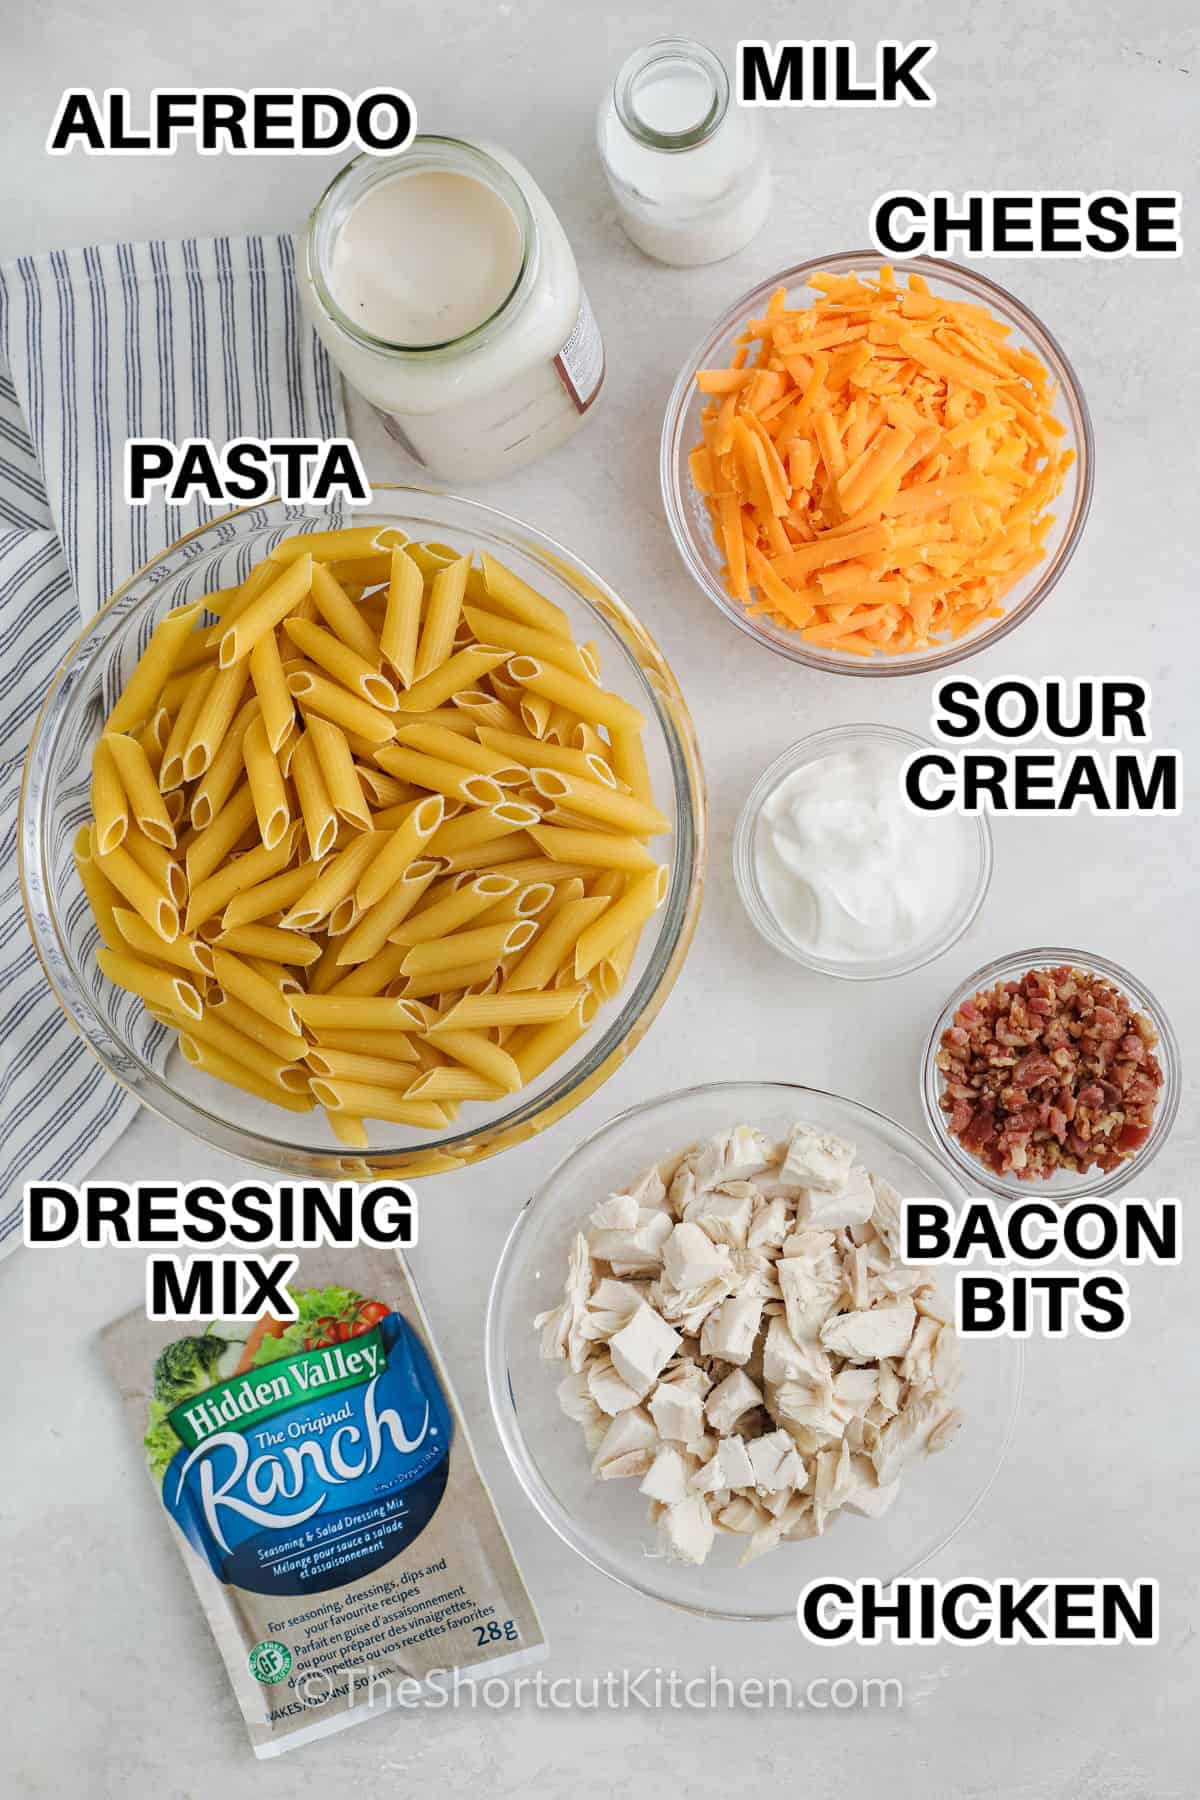 Alfredo sauce , milk , cheese , sour cream , bacon bits , chicken , pasta and ranch dressing mix with labels to make Chicken Bacon Ranch Pasta